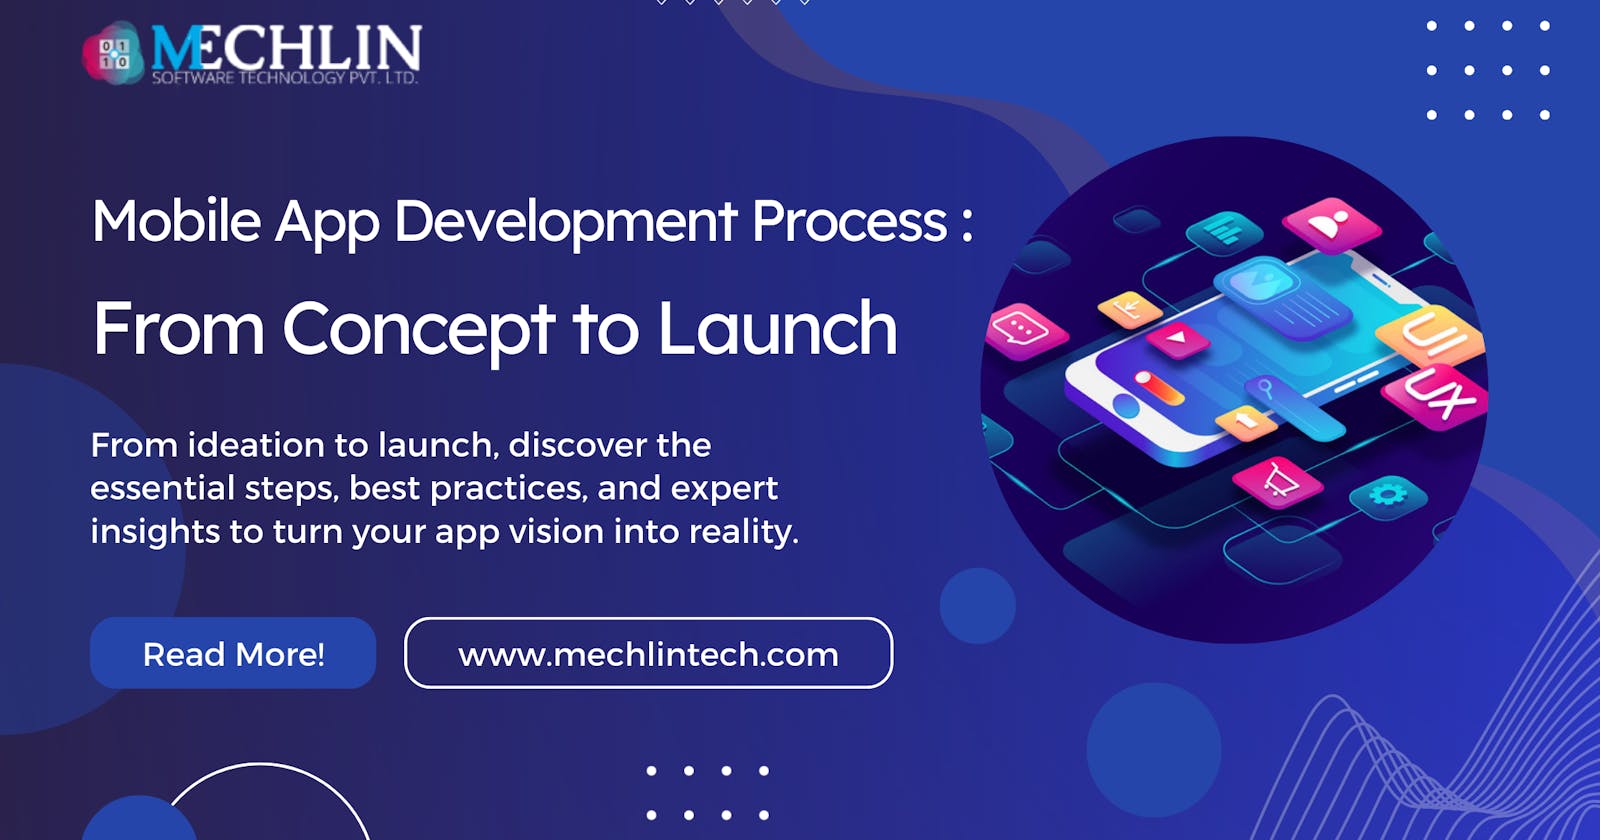 Mobile App Development Process: From Concept to Launch